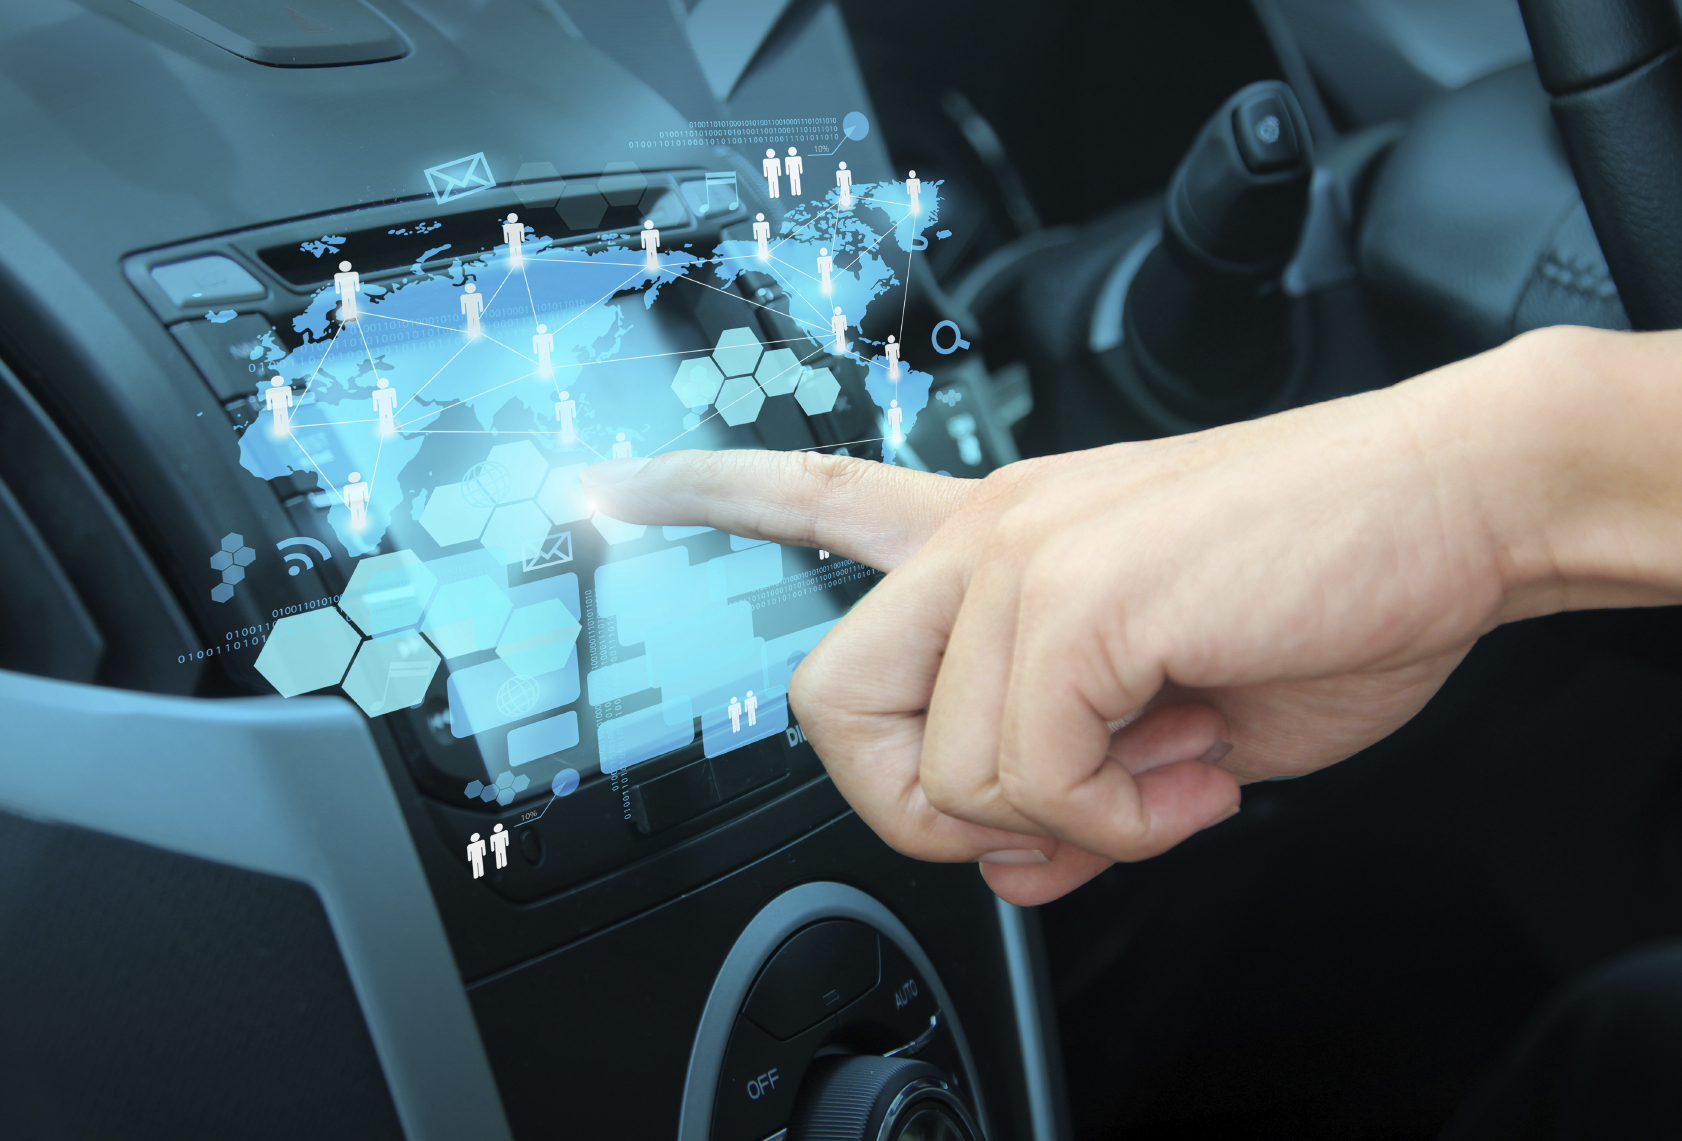 Renault, Nissan partner with Microsoft for connected car technology